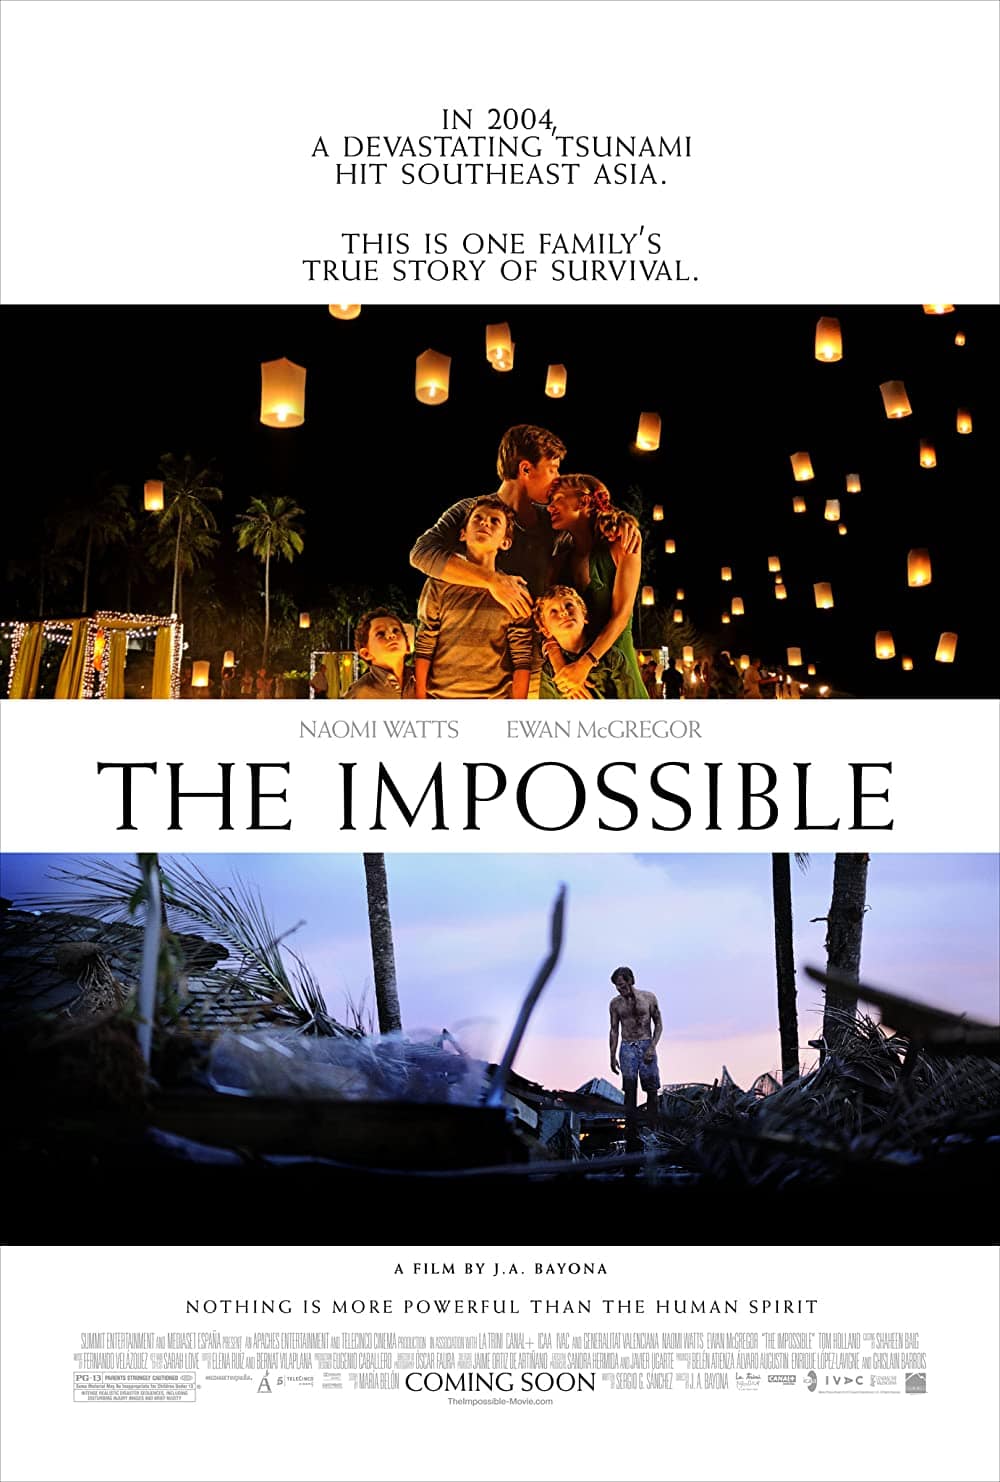 The Impossible (2012) Best Tsunami Movies to Add in Your Watchlist